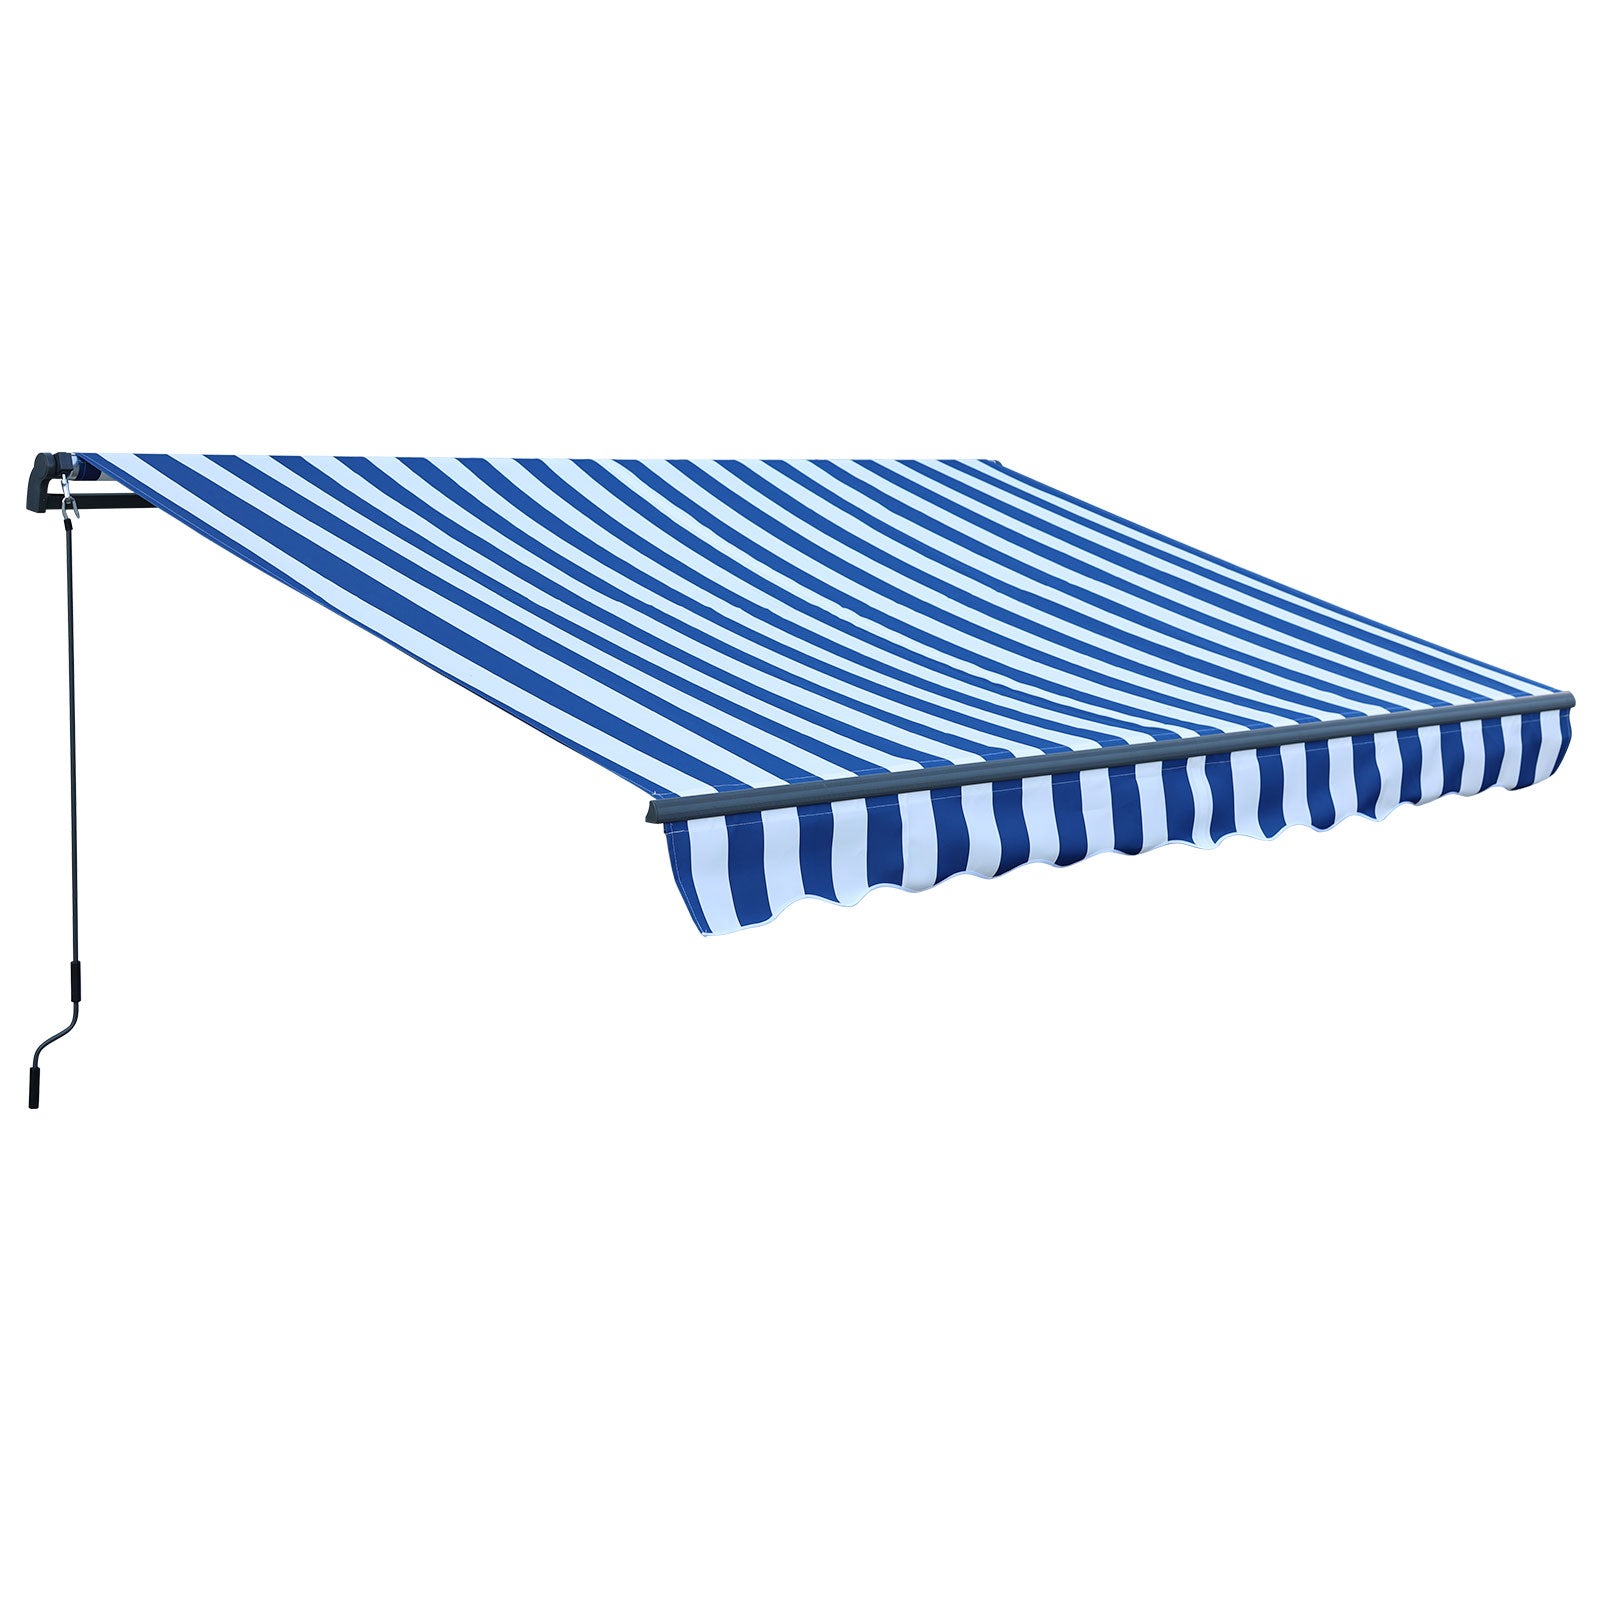 12'x  8' x 5' Retractable Window Awning Sunshade Shelter,Polyester Fabric,with Brackets and Two Wall Bases  Aoodor Blue and White  